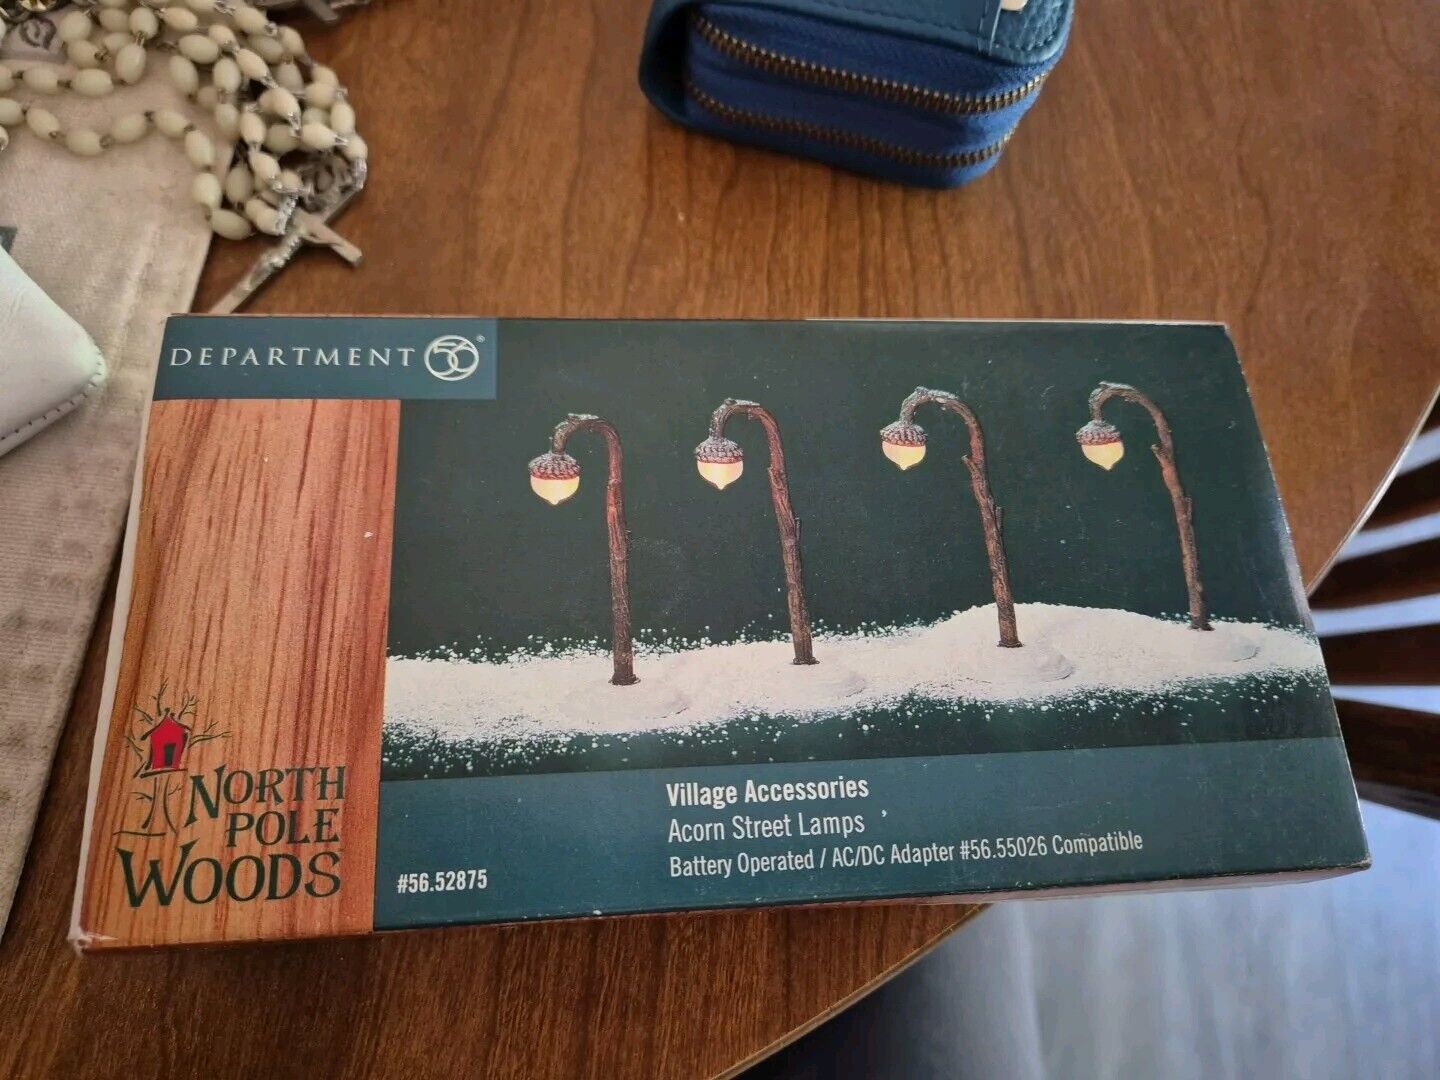 Department 56 52875 North Pole Woods Acorn Street Lamps Retired Set of 4 w/ Box